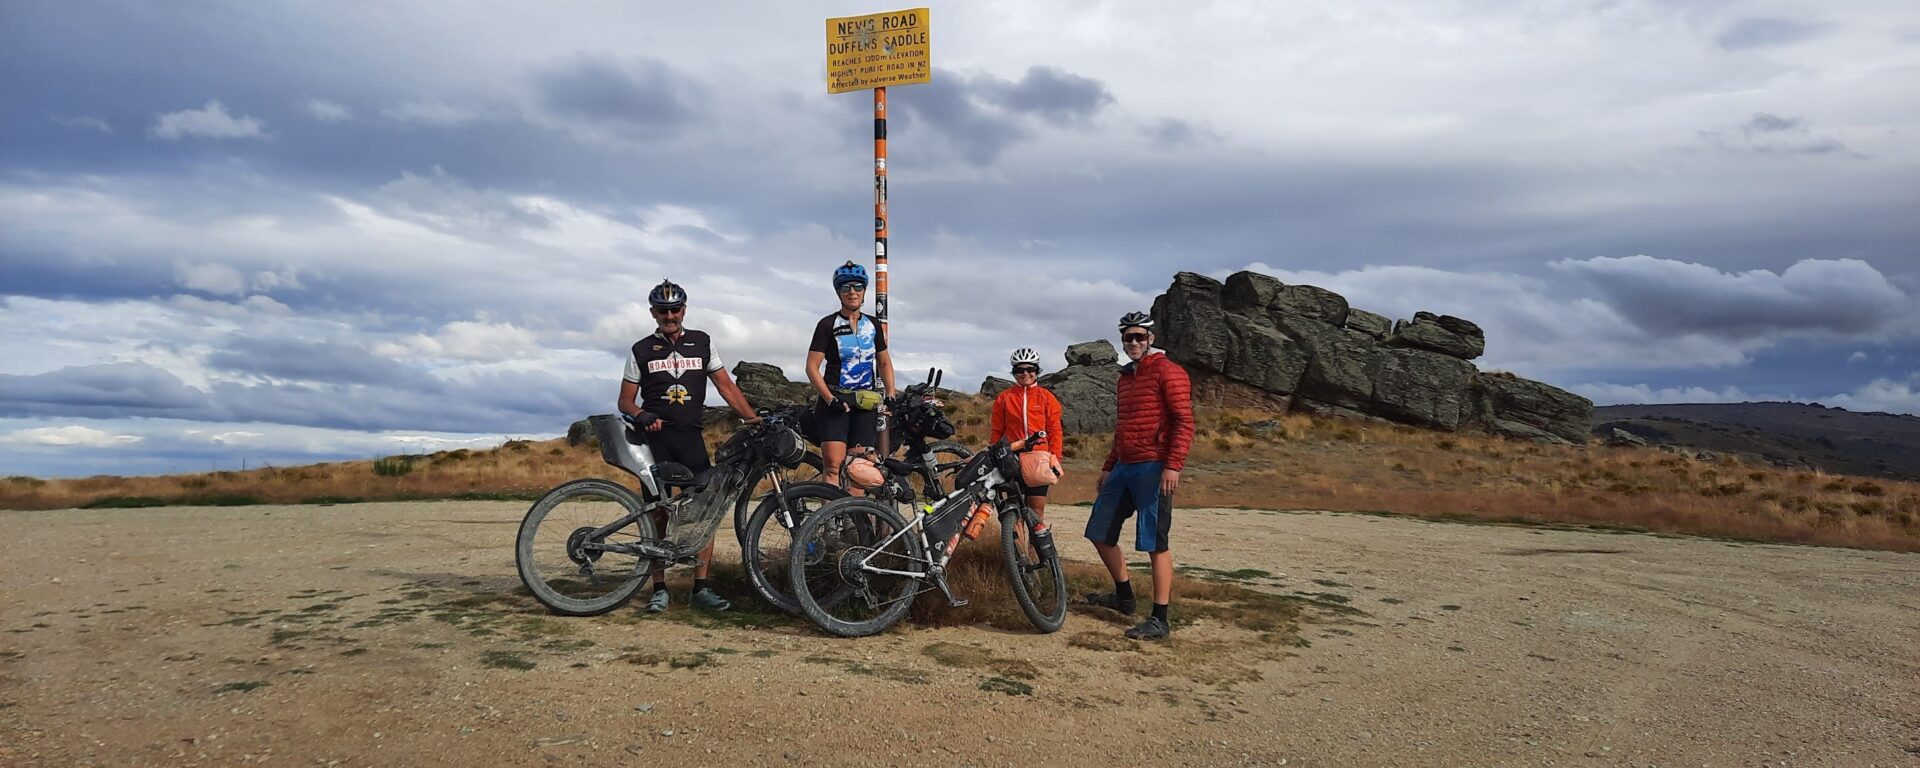 A group of cyclists stands near a road sign. All are posed on or near their bikes and are looking toward the camera with a smile.